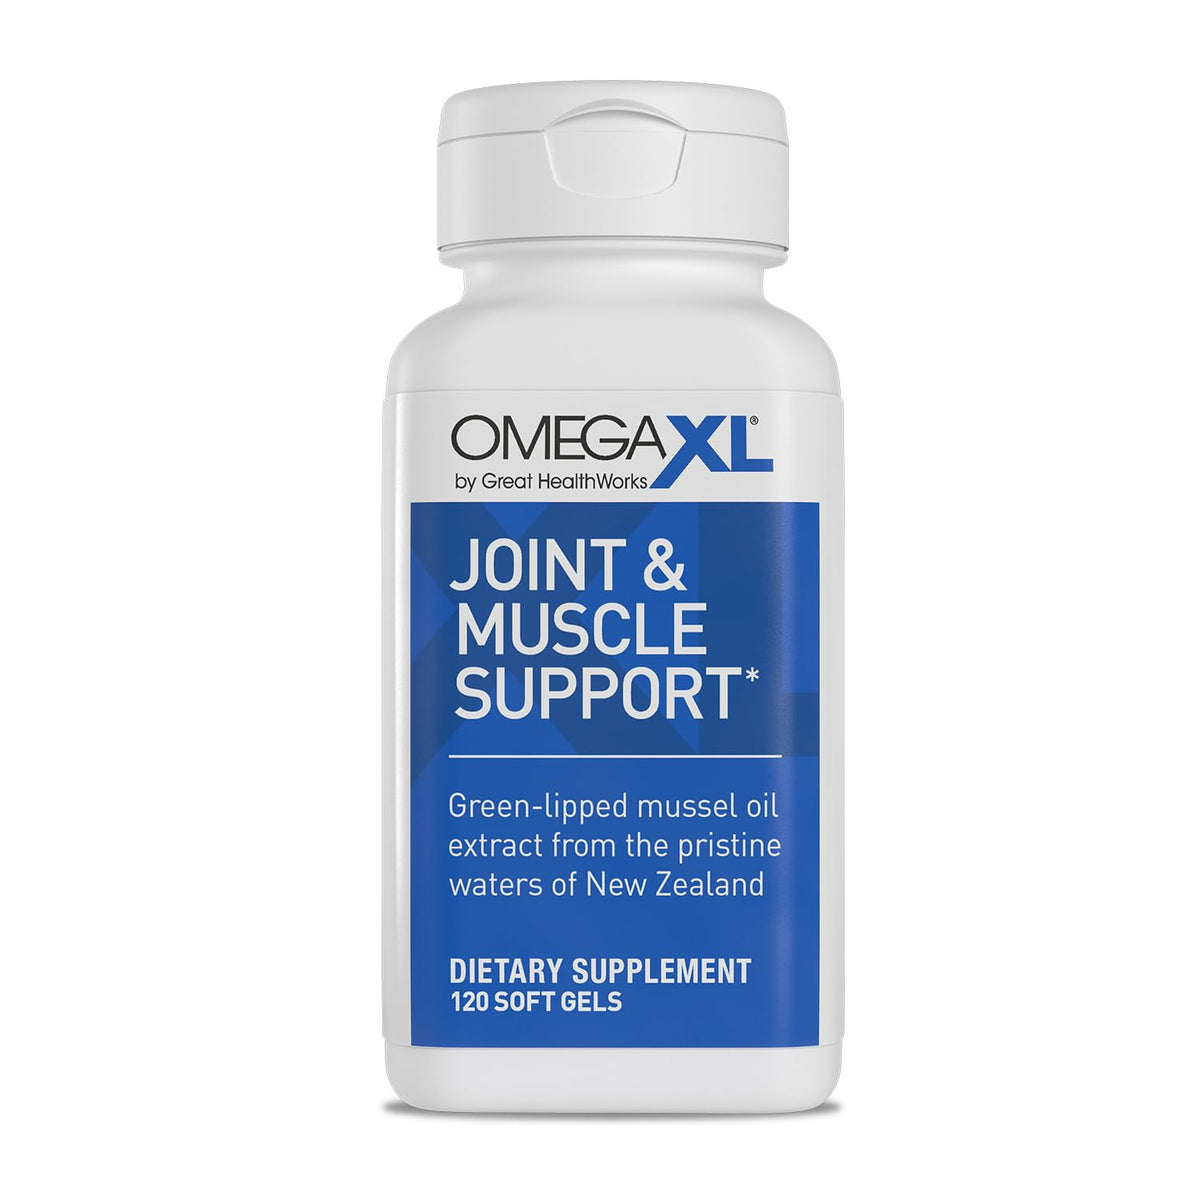 OmegaXL Joint Support Supplement - Natural Muscle Support, Green Lipped Mussel Oil, Soft Gel Pills, Drug-Free, 120 Count